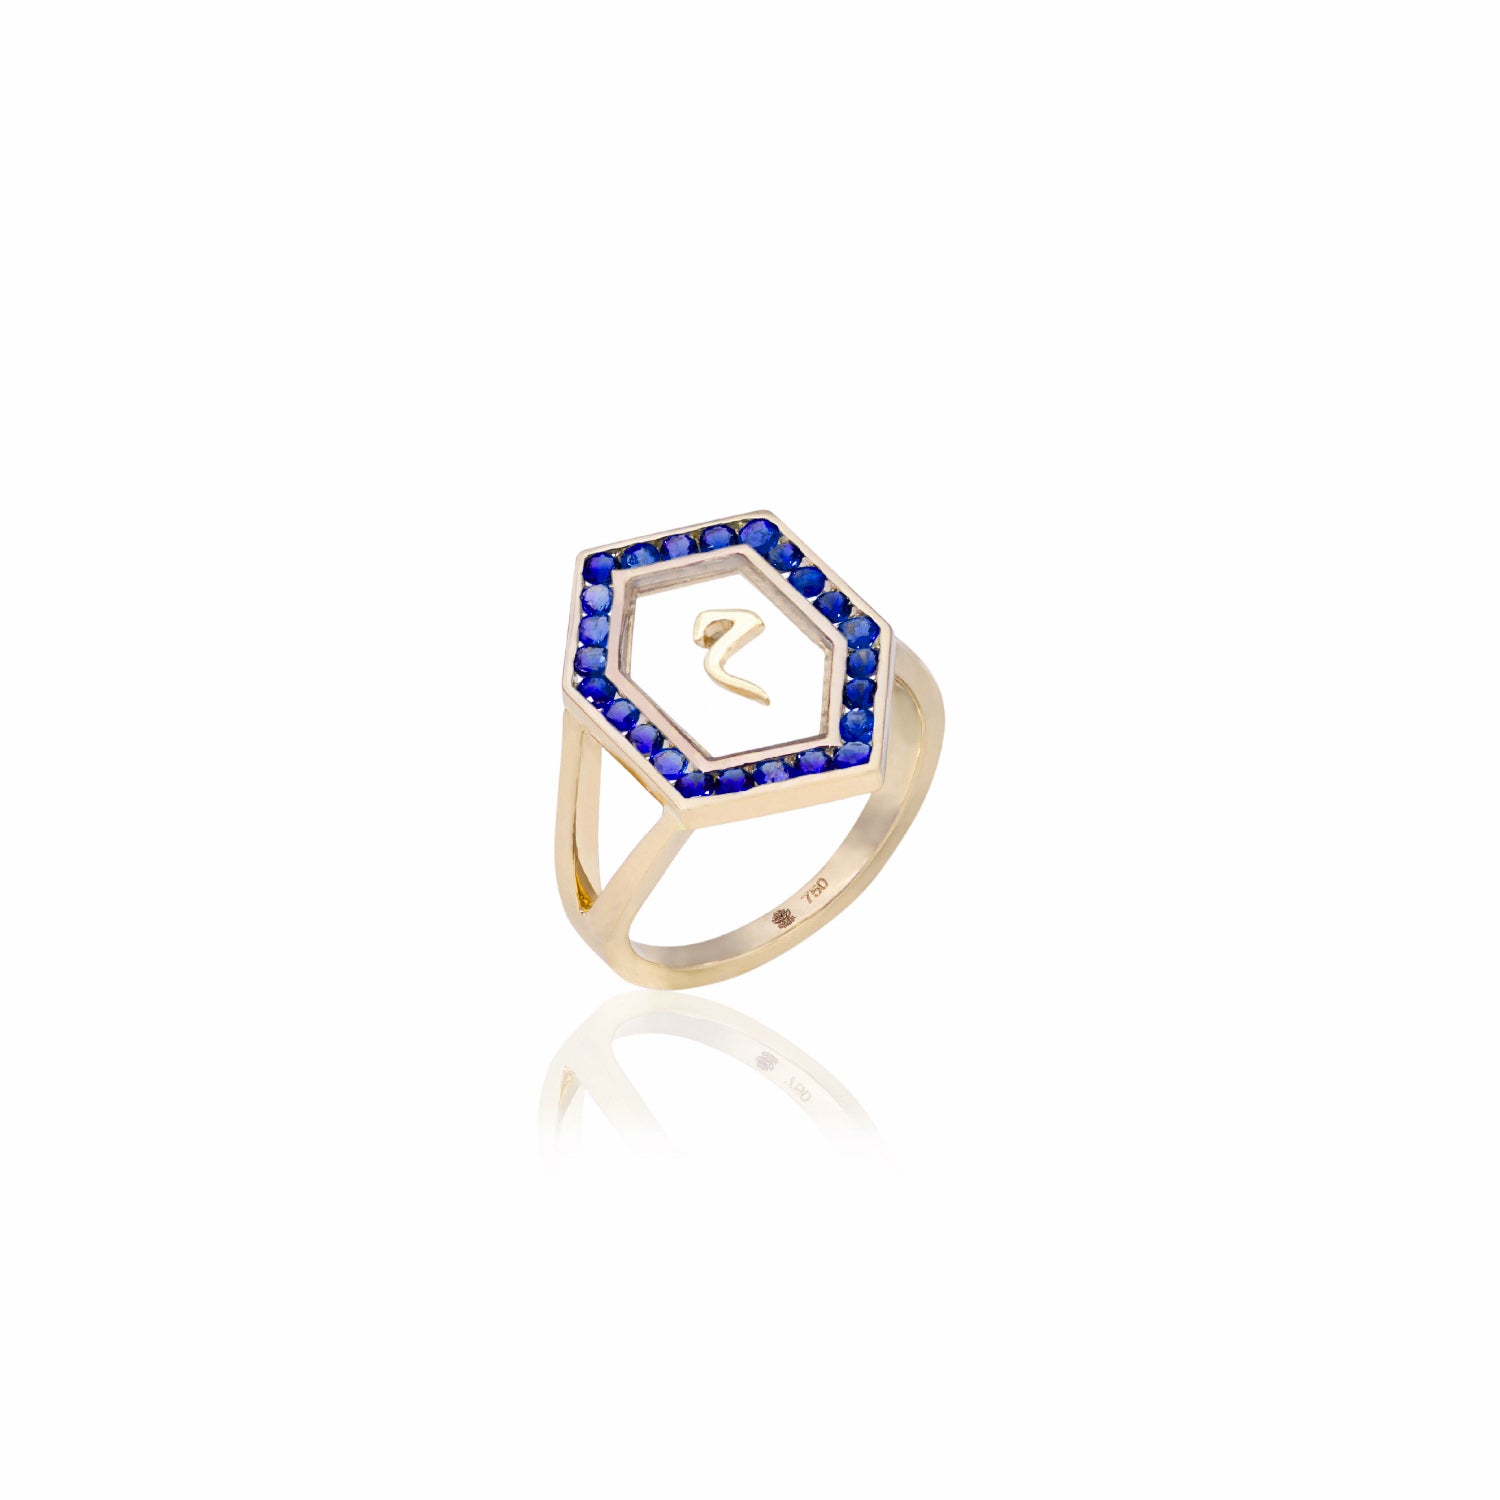 Qamoos 1.0 Letter م Sapphire Ring in Yellow Gold